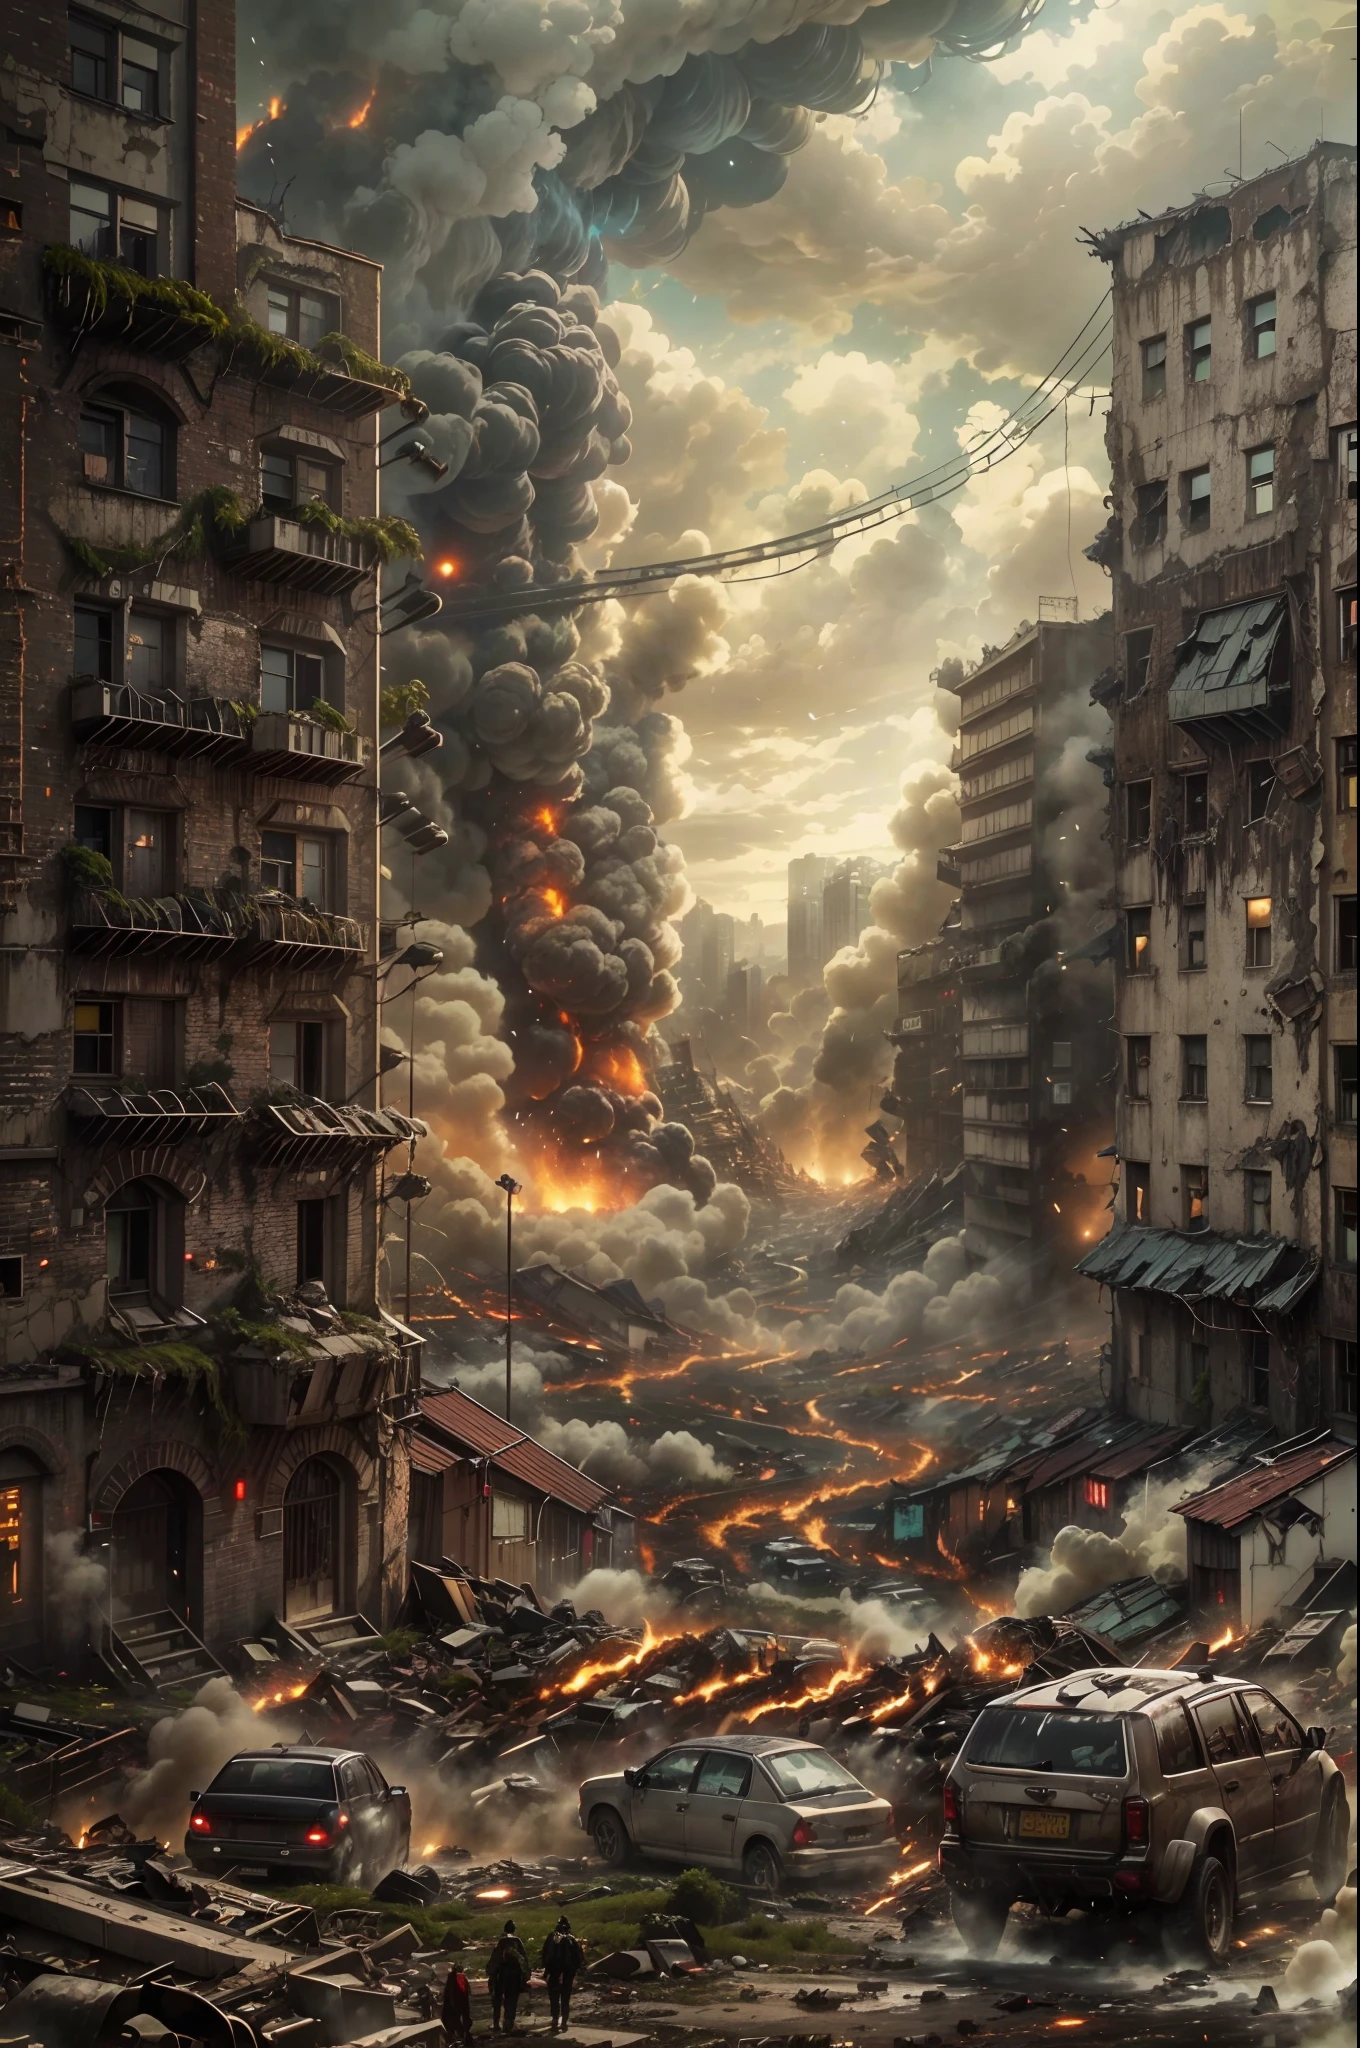 The prompt generated by the AI is:
"best quality,4k,8k,highres,masterpiece:1.2,ultra-detailed,realistic:1.37,(Attack on Titan),Beast Titan destroying city,furry,long arm,detailed destruction,apocalyptic scenery,detailed buildings,devastation,destructive force,emotional character,animistic appearance,post-apocalyptic landscape,chaotic destruction,expressive movements,ominous atmosphere,dystopian cityscape,massive destruction,city engulfed in chaos,dramatic lighting,heavy smoke and debris,huge creature wreaking havoc,vivid colors,captivating composition"